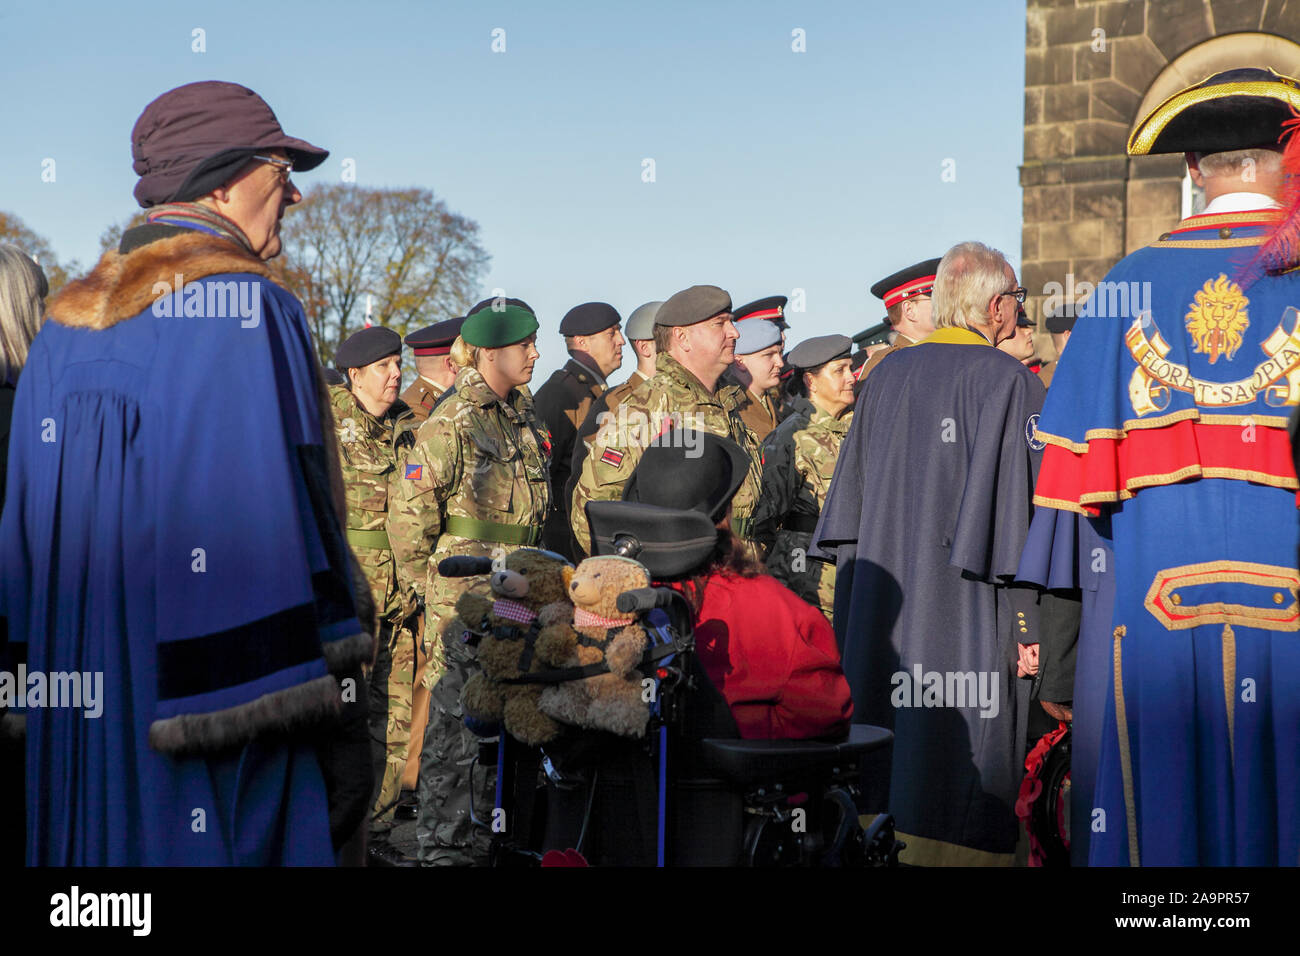 Remembrance Sunday commemorations at St Chad's Church in Shrewsbury. RAF, Navy and Army personnel viewed here in attendance. Stock Photo